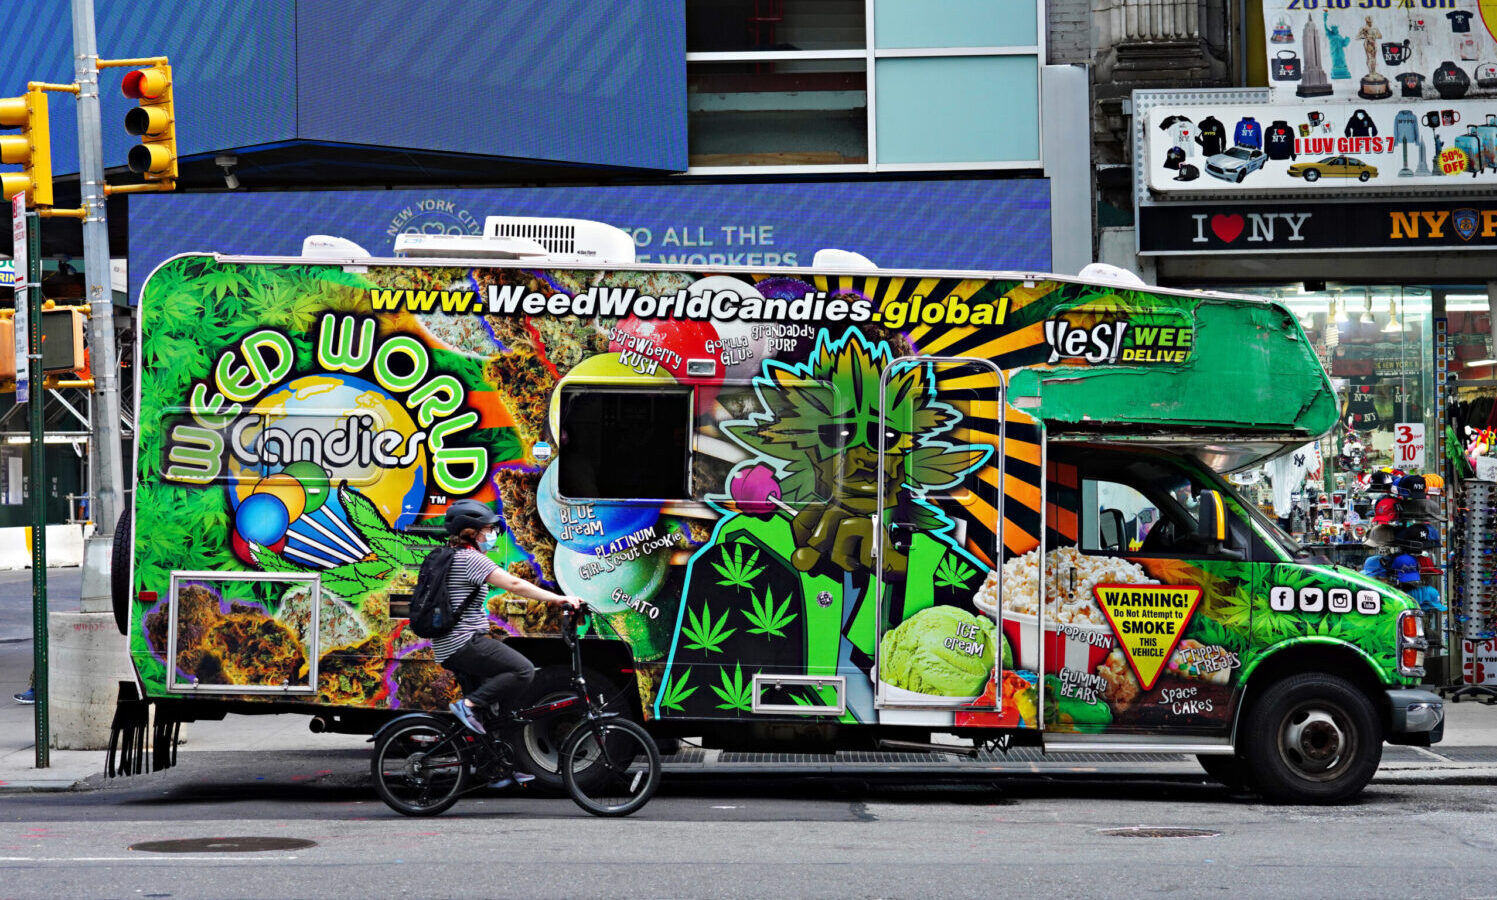 A Bunch Of NYC Weed Trucks Got Towed, But Not For Illegally Selling Weed